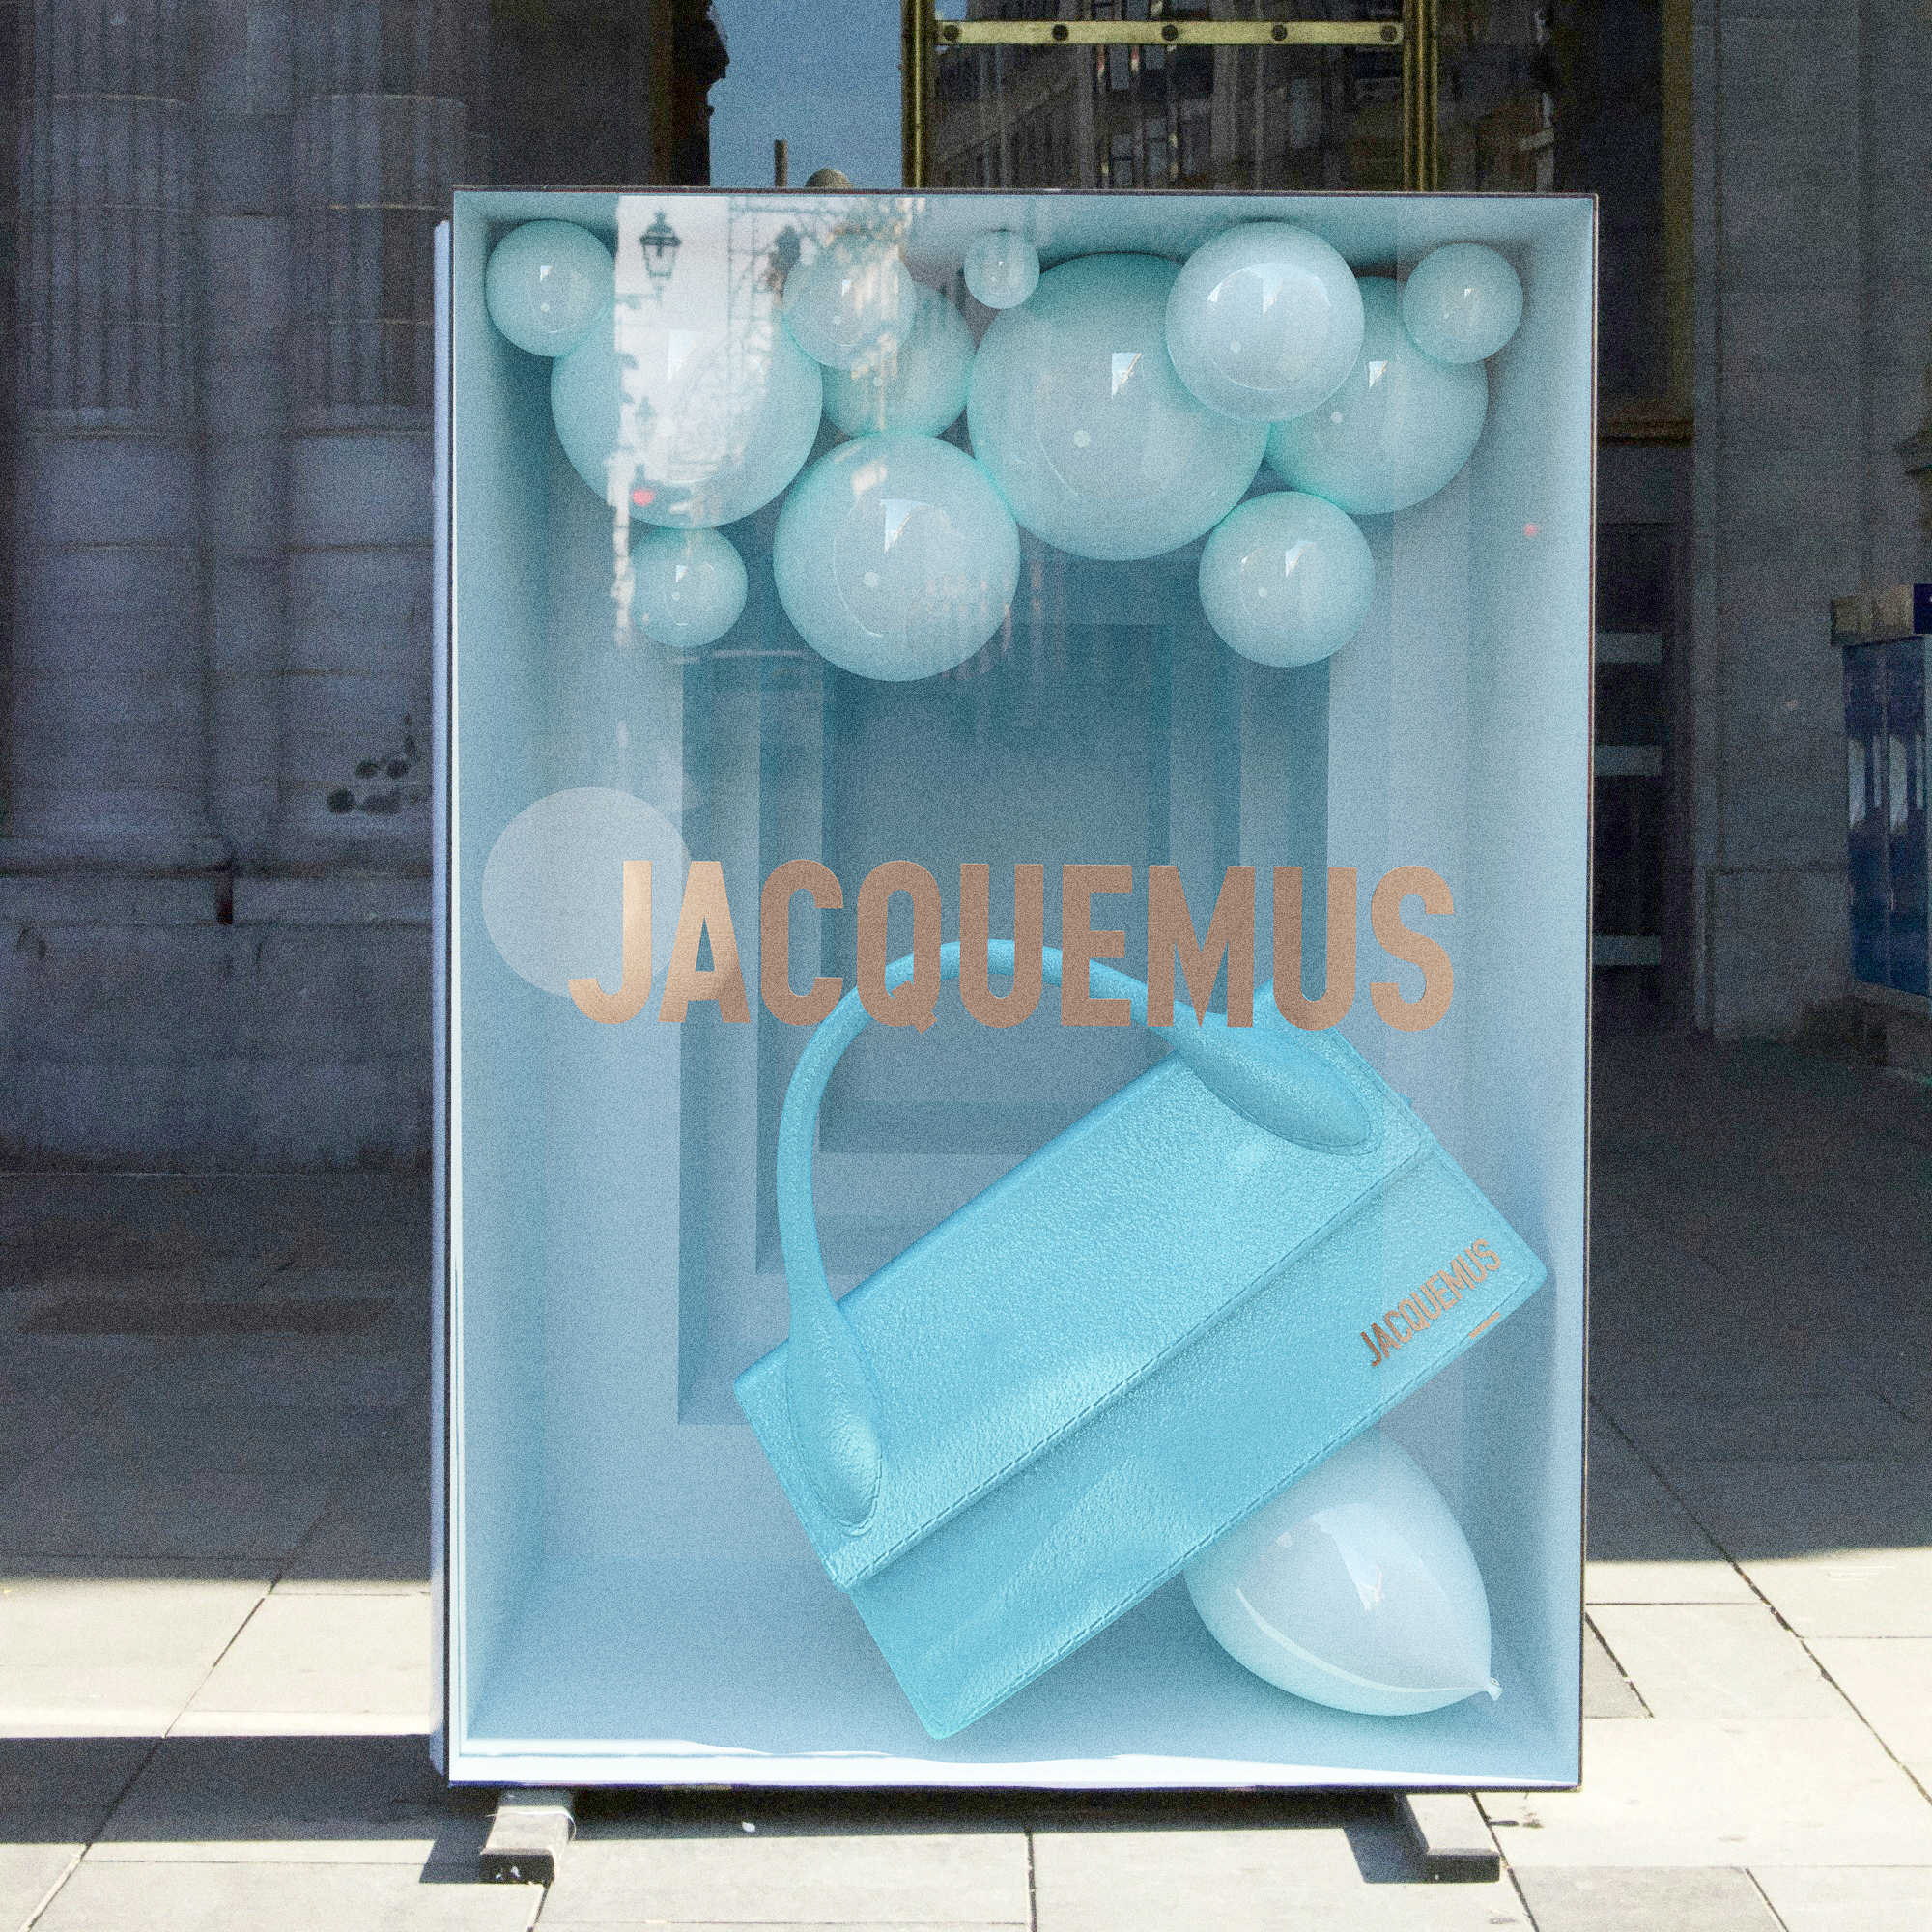 Jacquemus CGI marketing video, 3d video in augmented reality where a purse is flying out the window